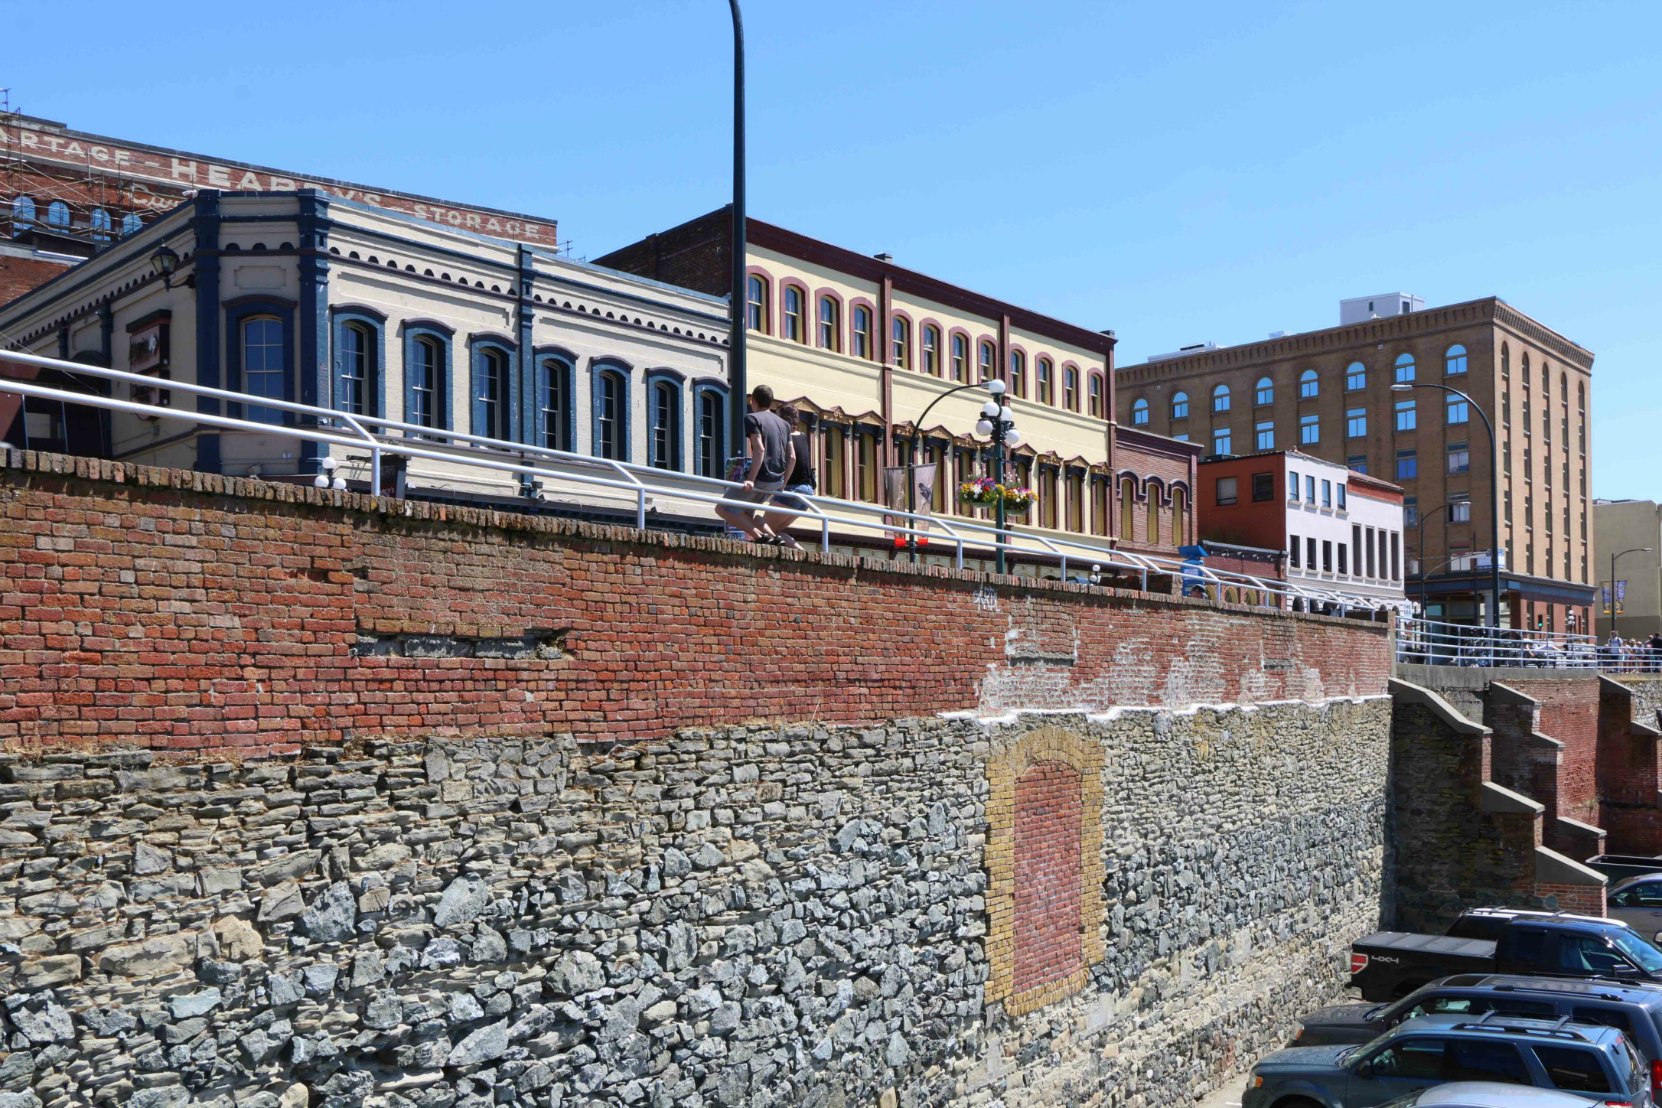 Part of the Hudson's Bay Company warehouse retaining wall, built in 1858 and extended in 1883.